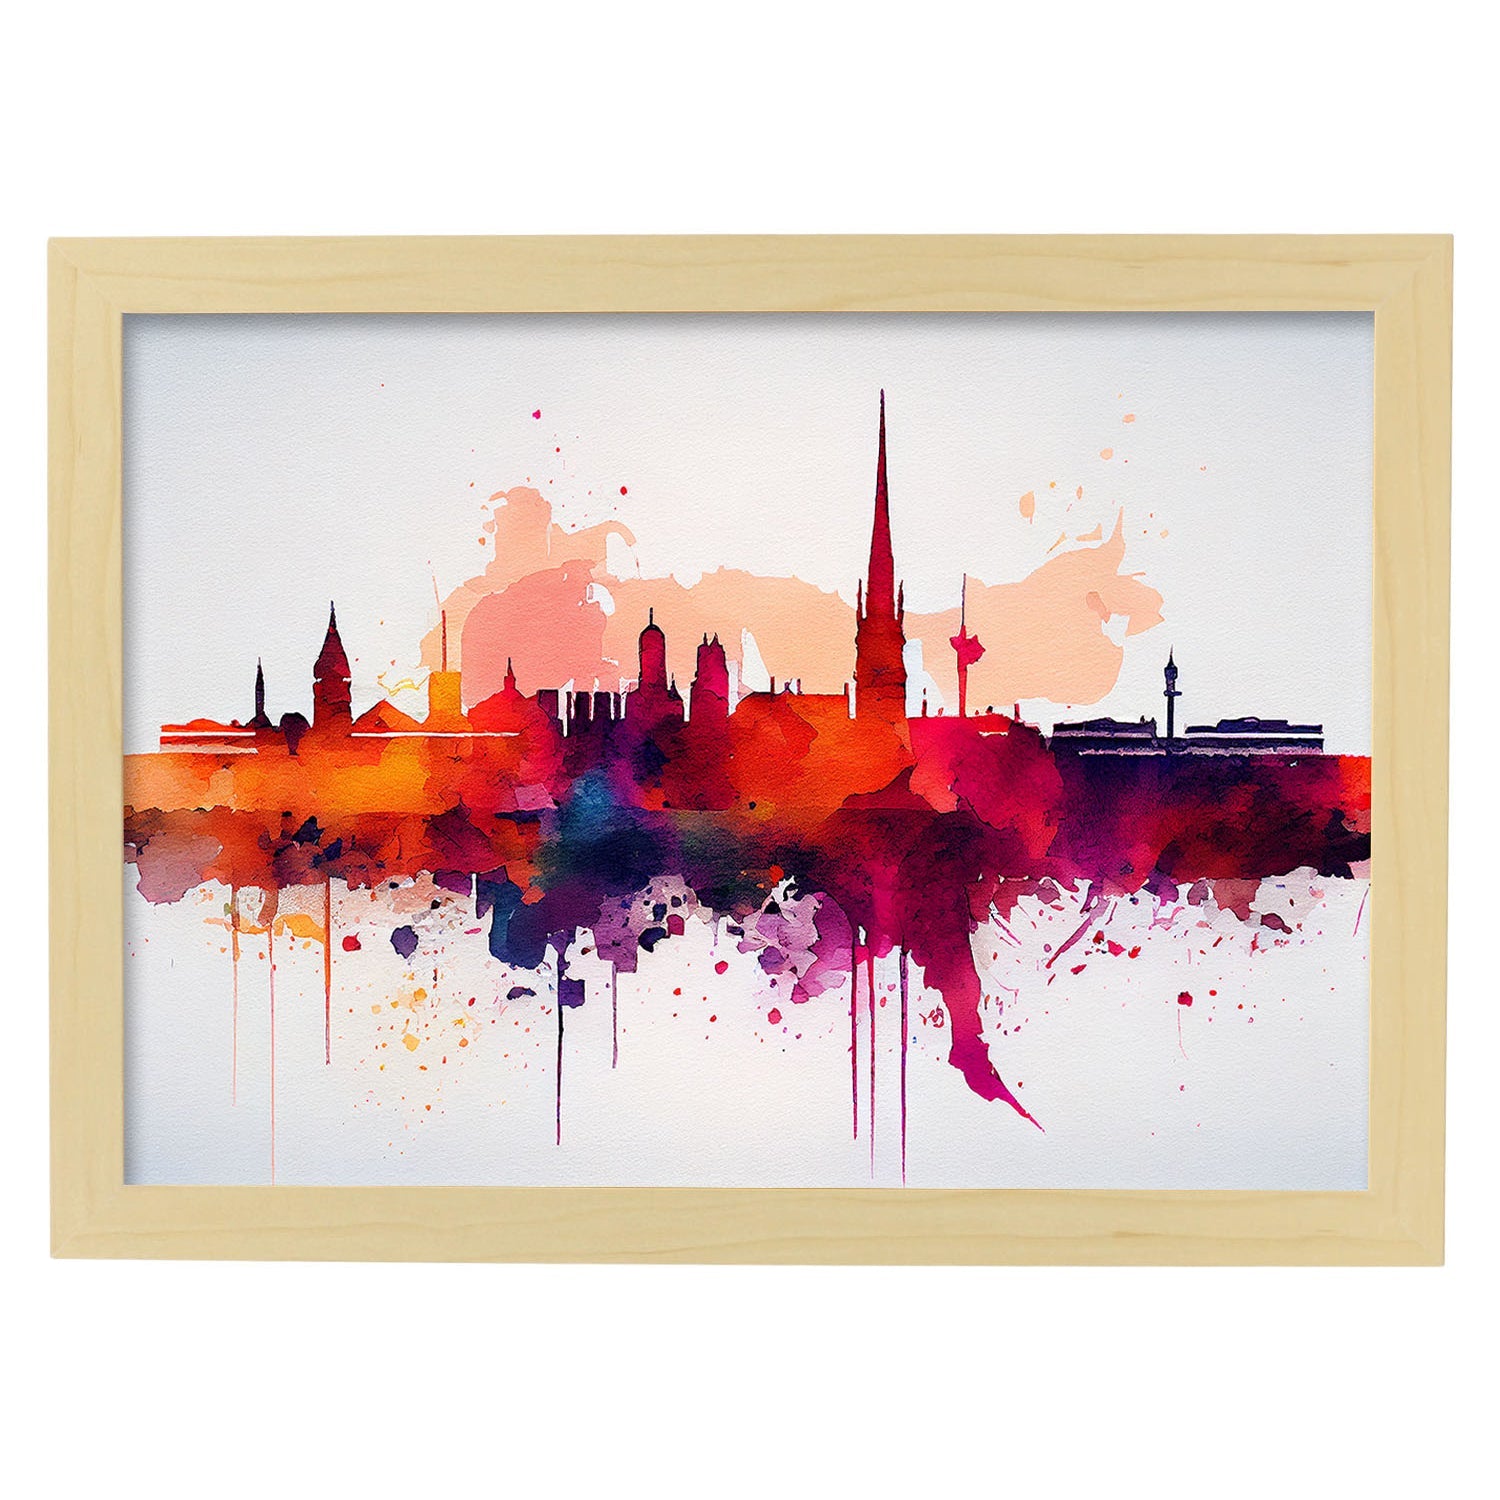 Nacnic watercolor of a skyline of the city of Bordeaux_2. Aesthetic Wall Art Prints for Bedroom or Living Room Design.-Artwork-Nacnic-A4-Marco Madera Clara-Nacnic Estudio SL